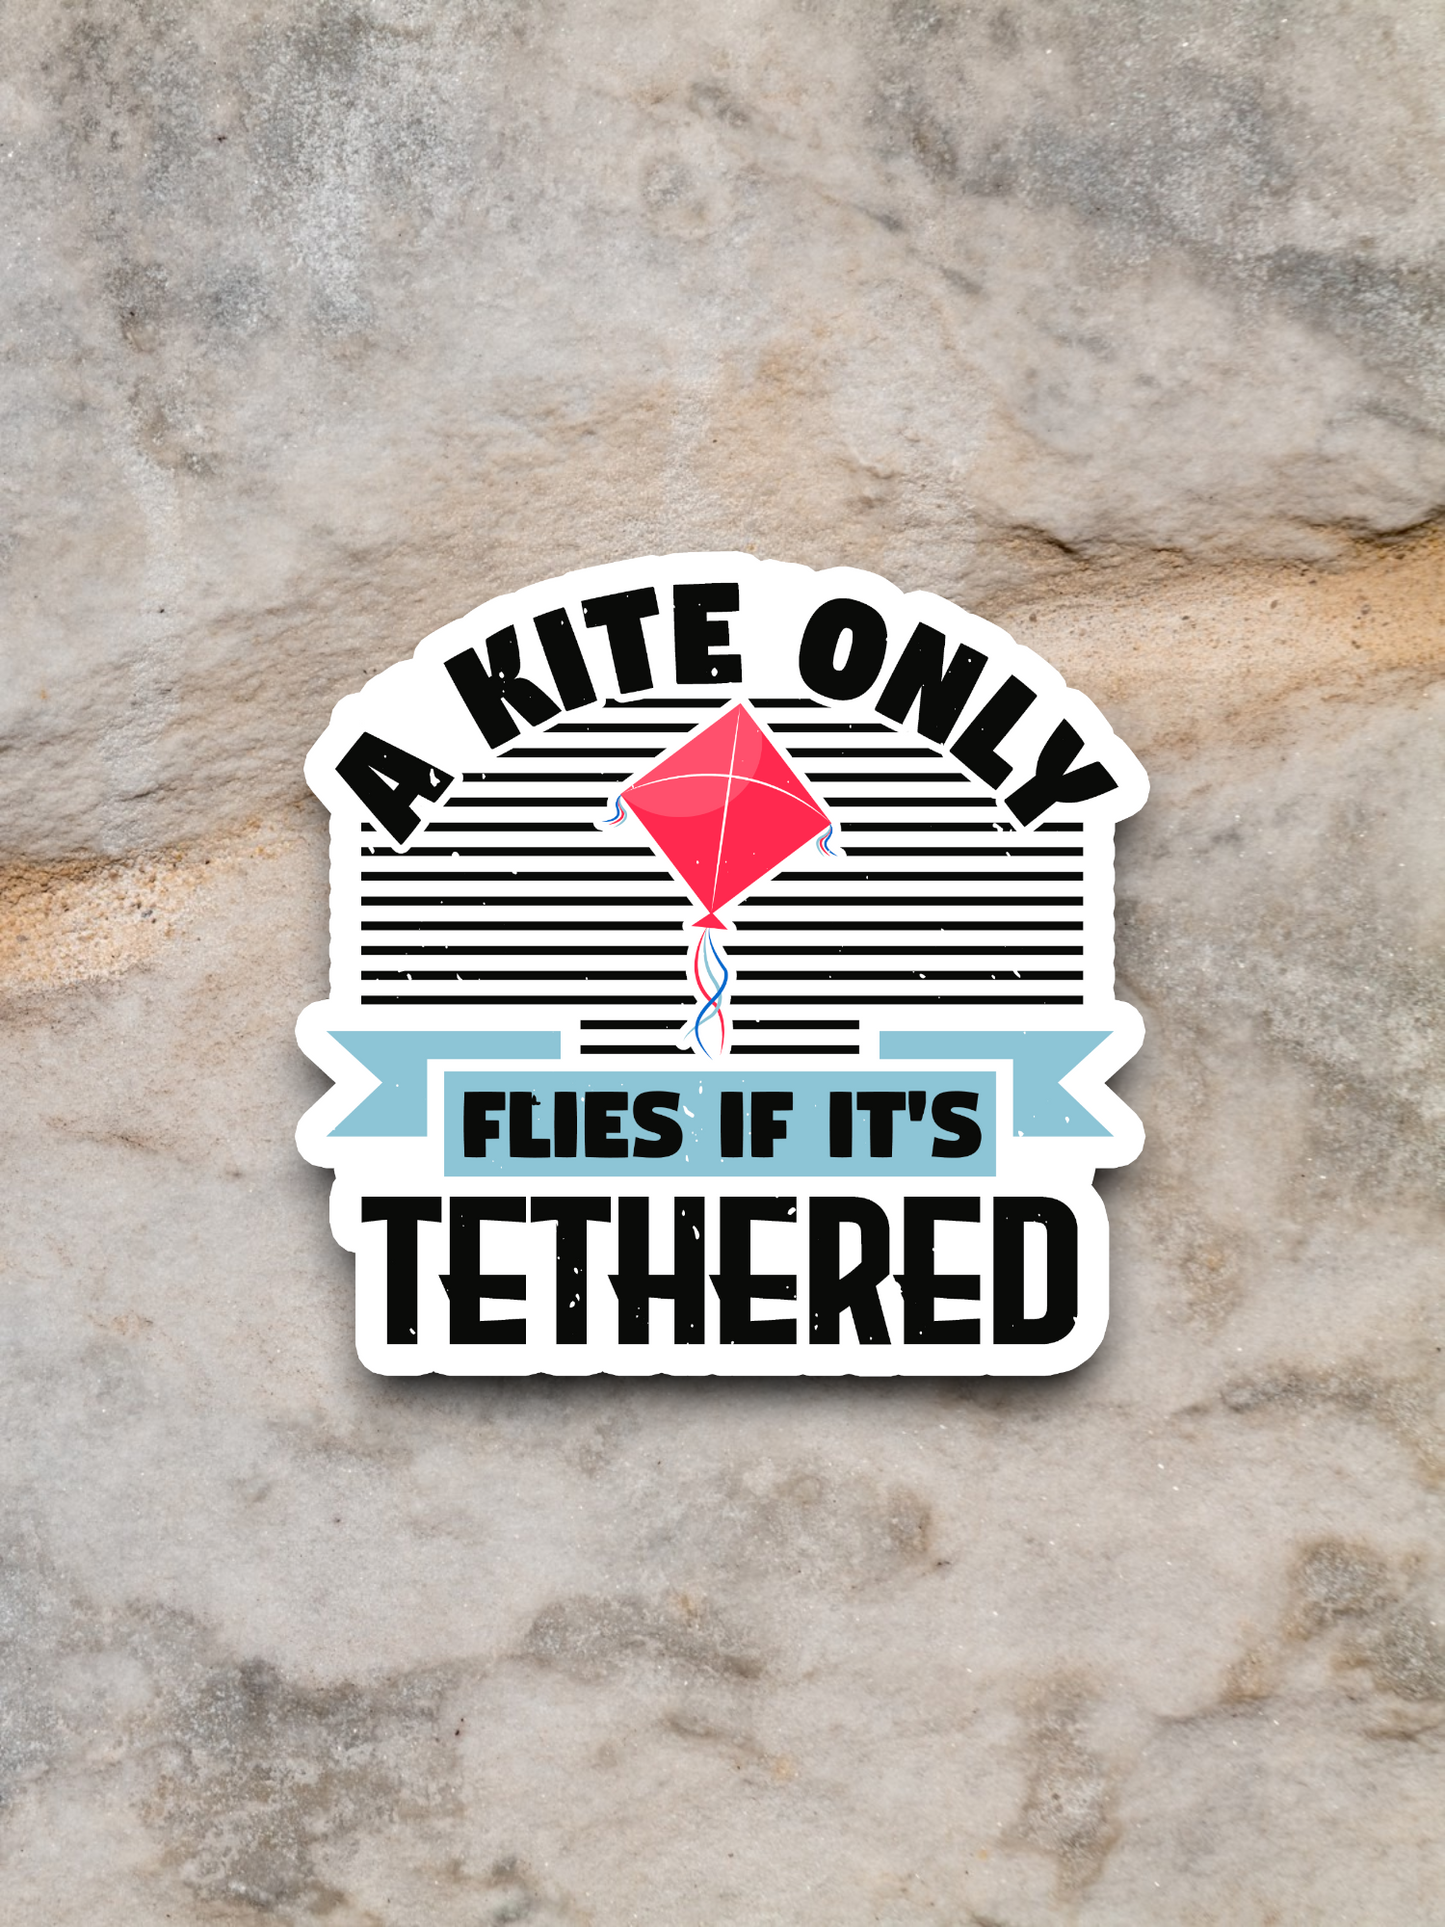 A Kite Only Lies if it's Tethered Sticker